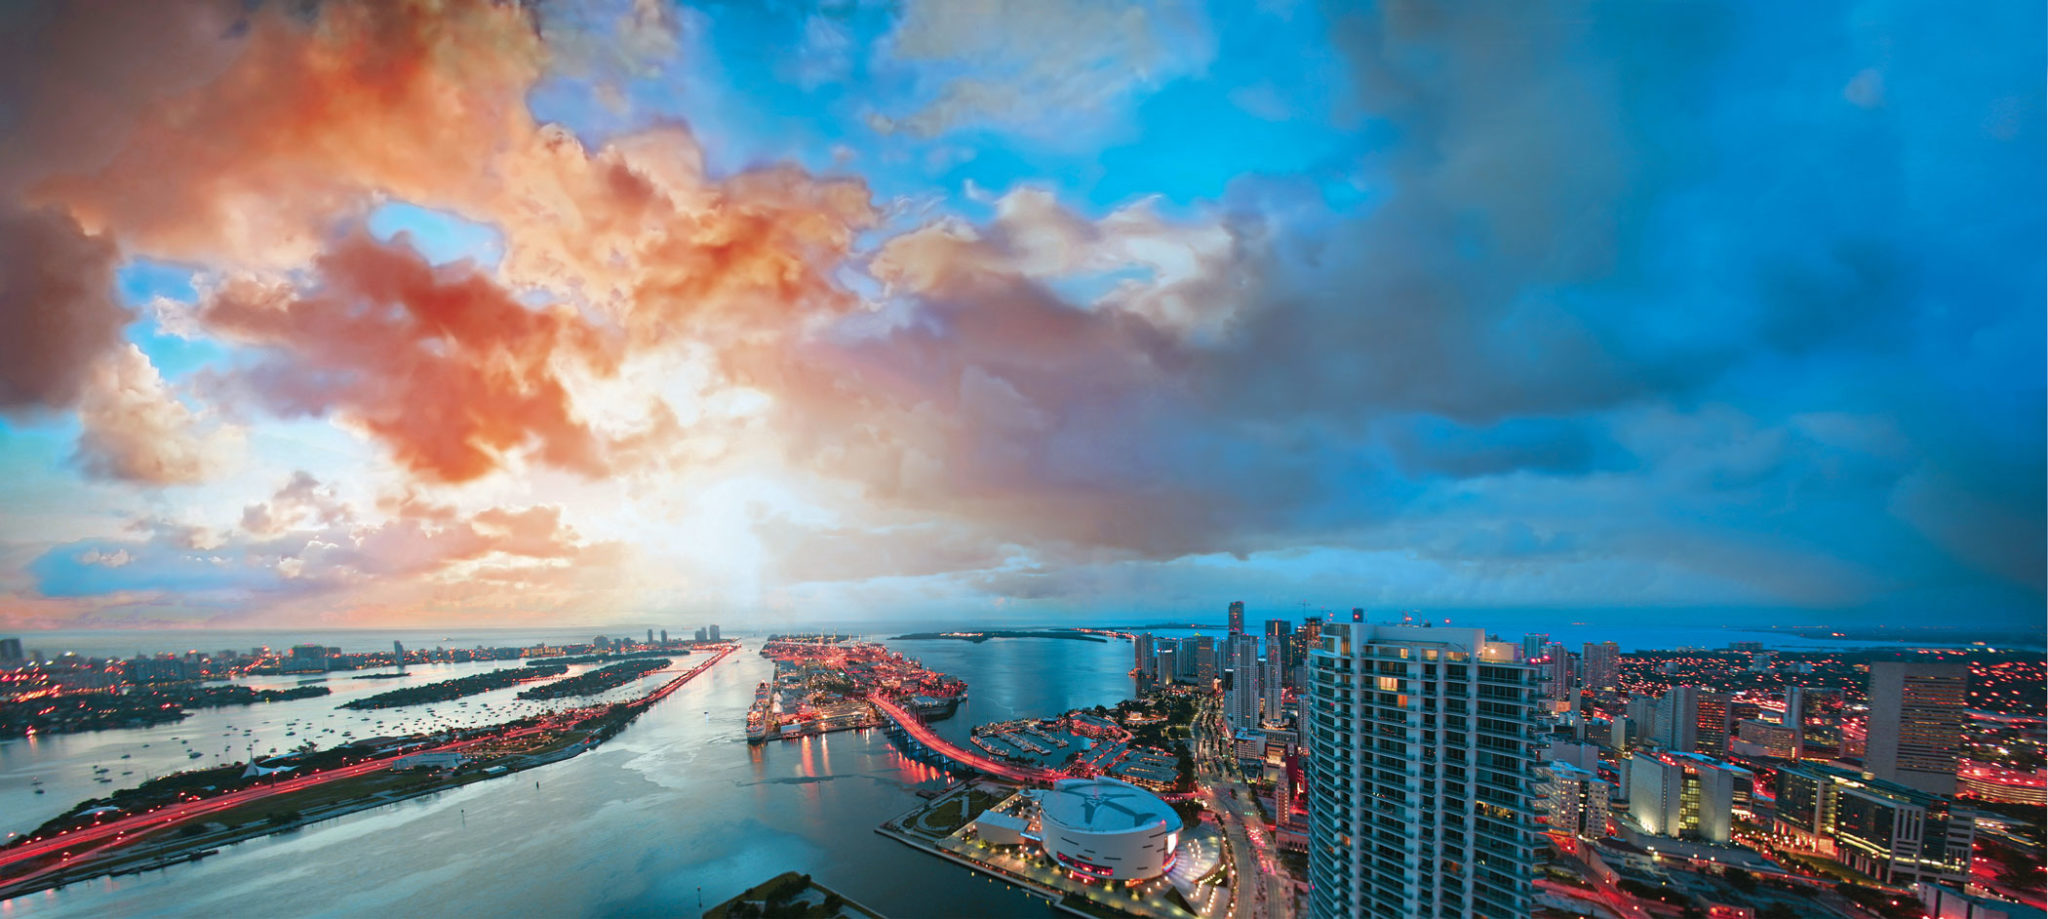 Asian Investors Actively Eye Miami’s Real Estate Market